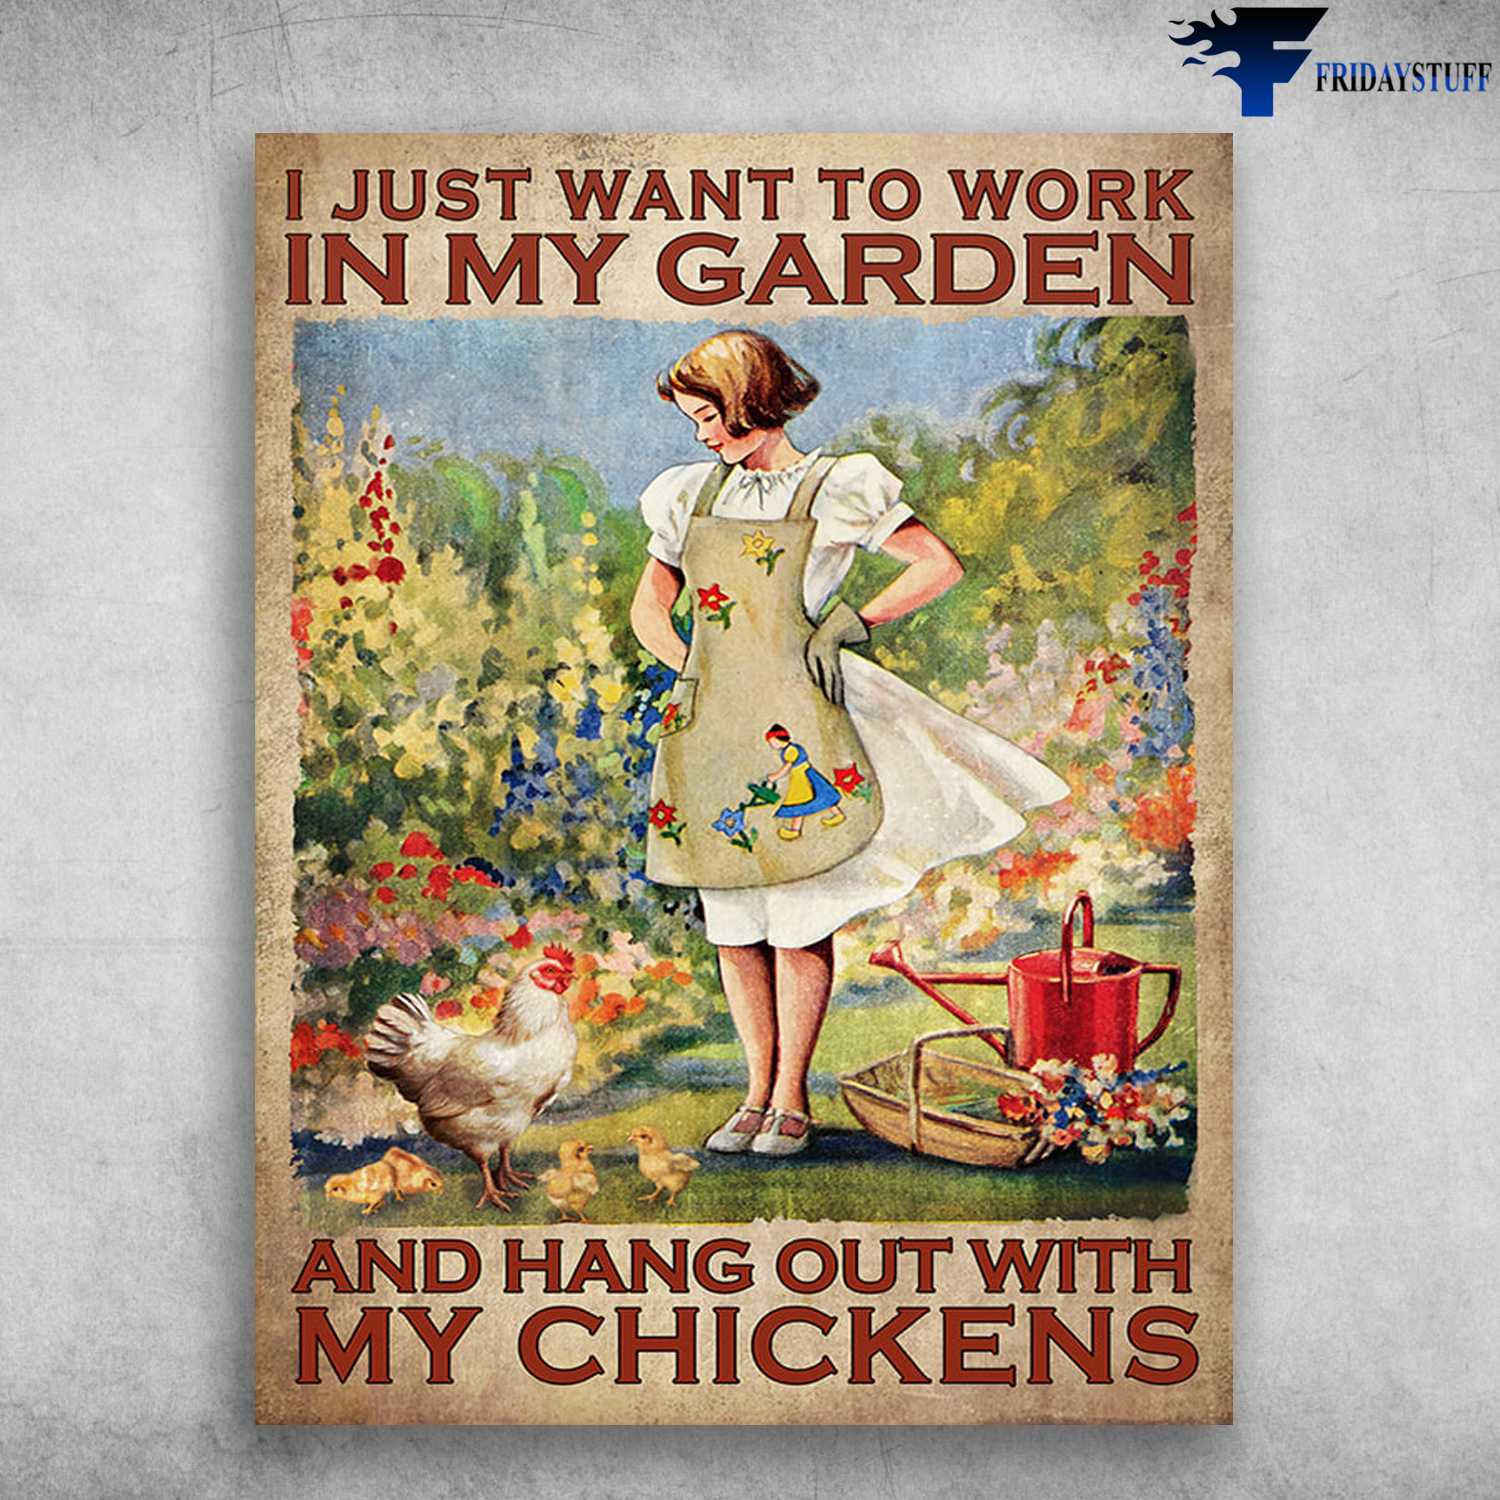 Gardening With Chicken, Gardening Lover - I Just Want To Work In My Garden, And Hang Out With My Chickens